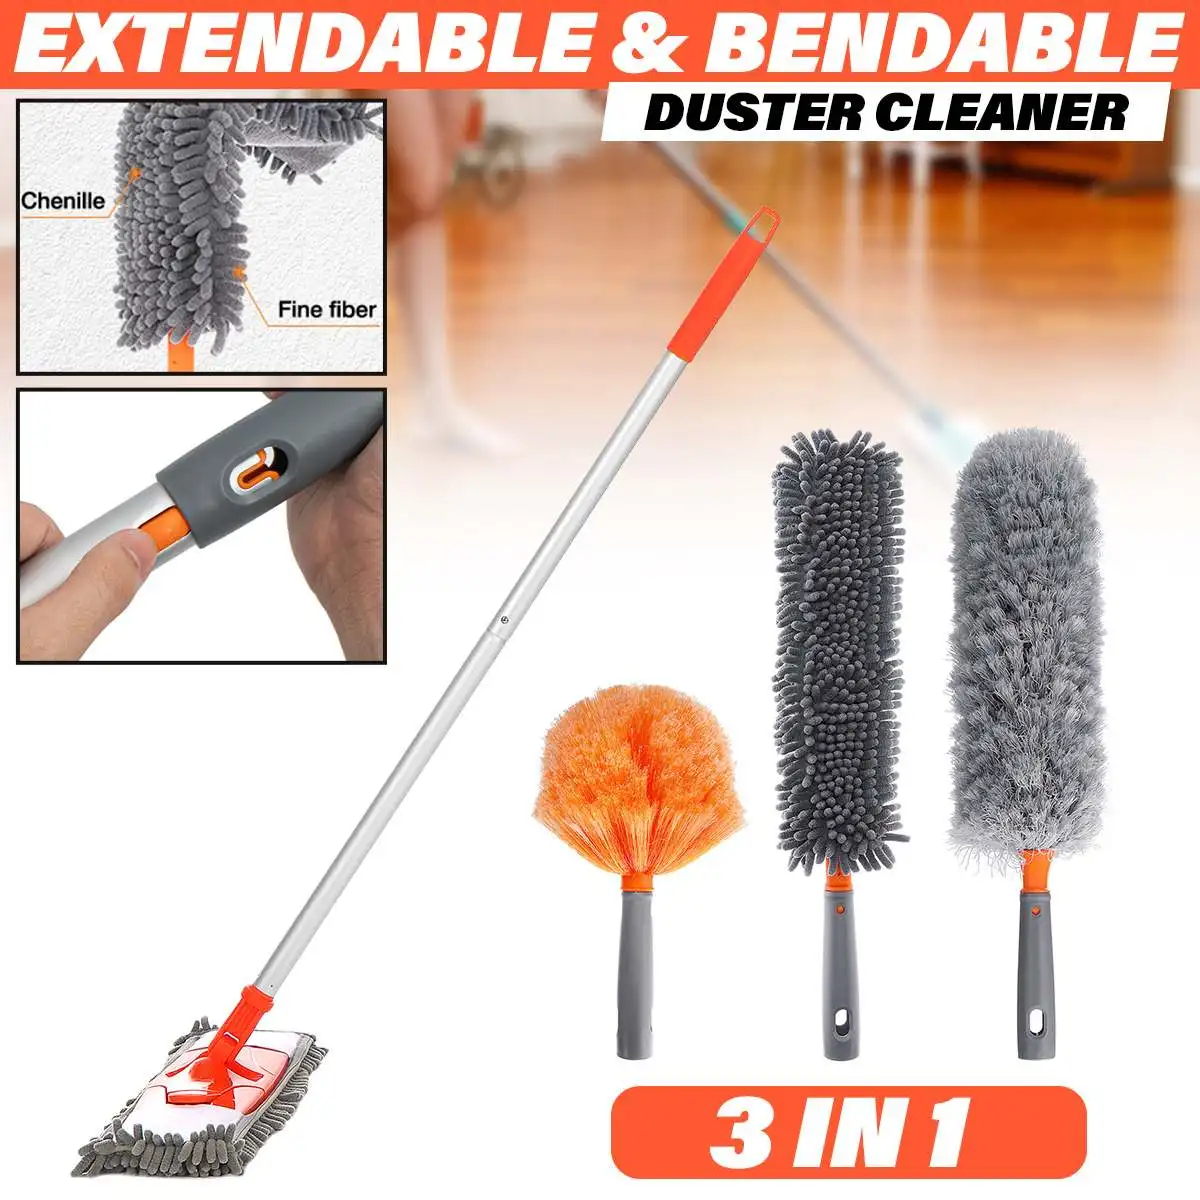 1.8m Extendable Cleaning Duster Ceiling Feather Plumage Sofa Car Dust Cleaner Floor Gap Brush Home Household Car Cleaning Tool